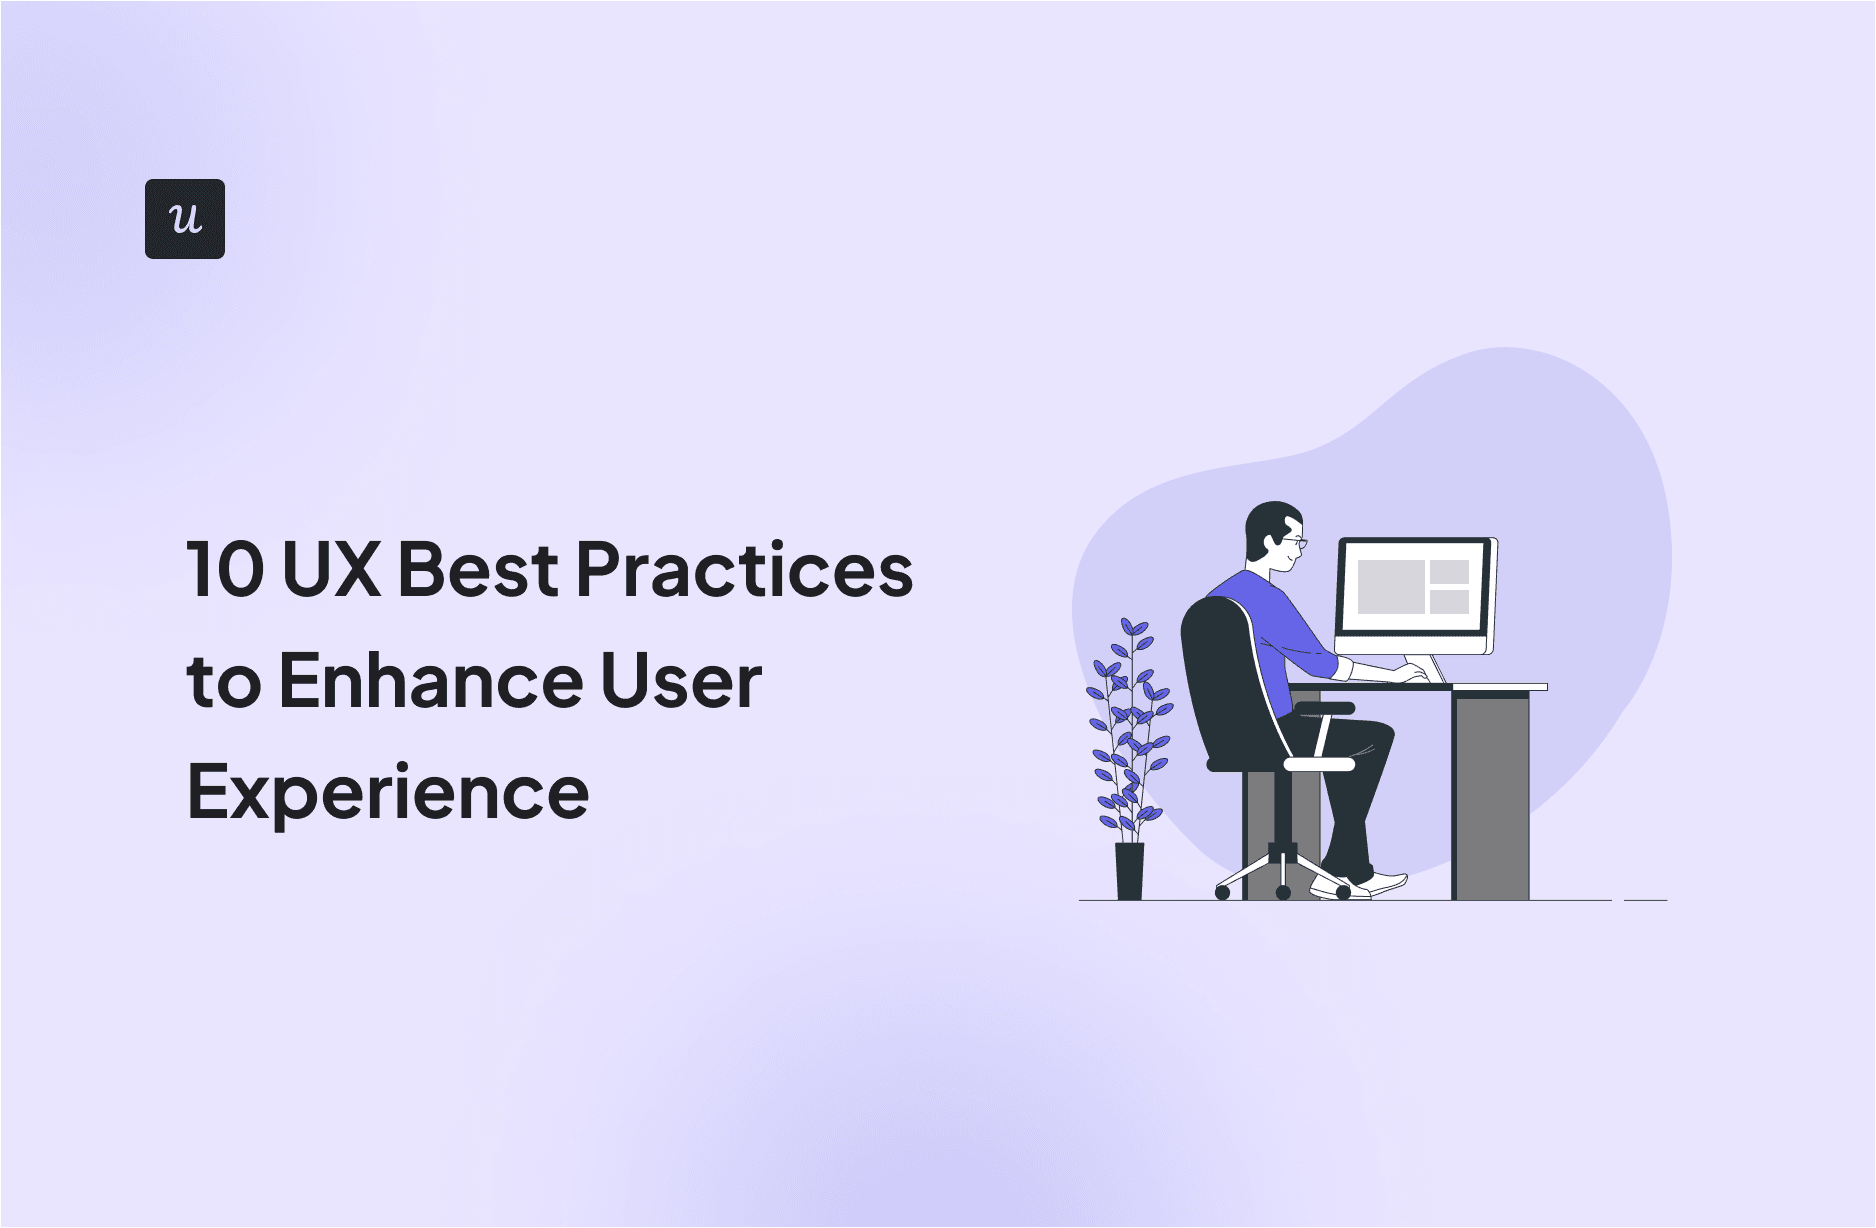 10 UX Best Practices to Enhance User Experience cover